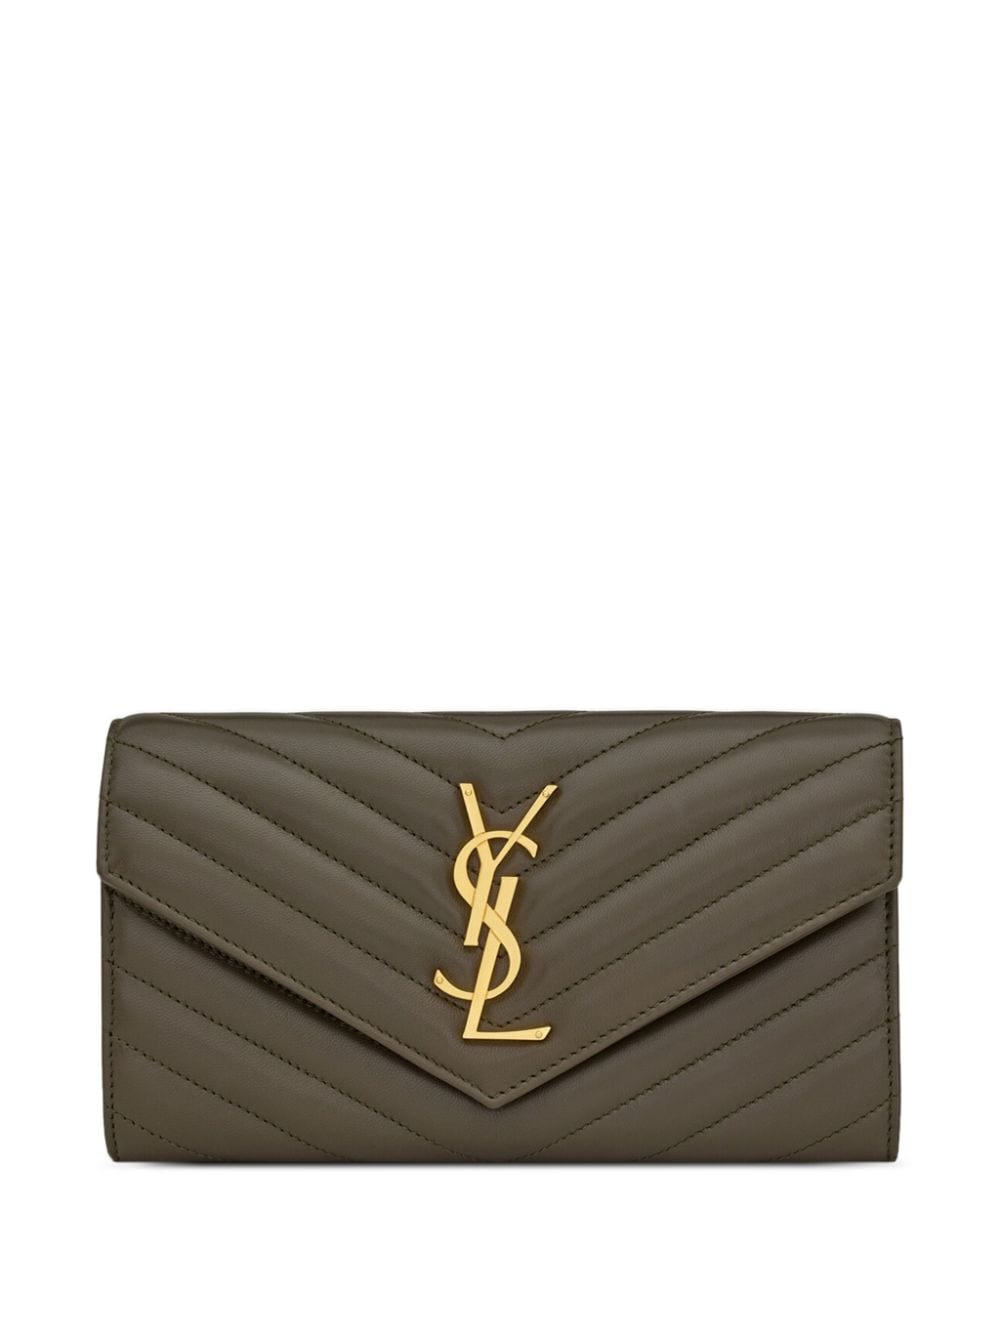 Saint Laurent Cassandre Quilted Leather Wallet In Brown